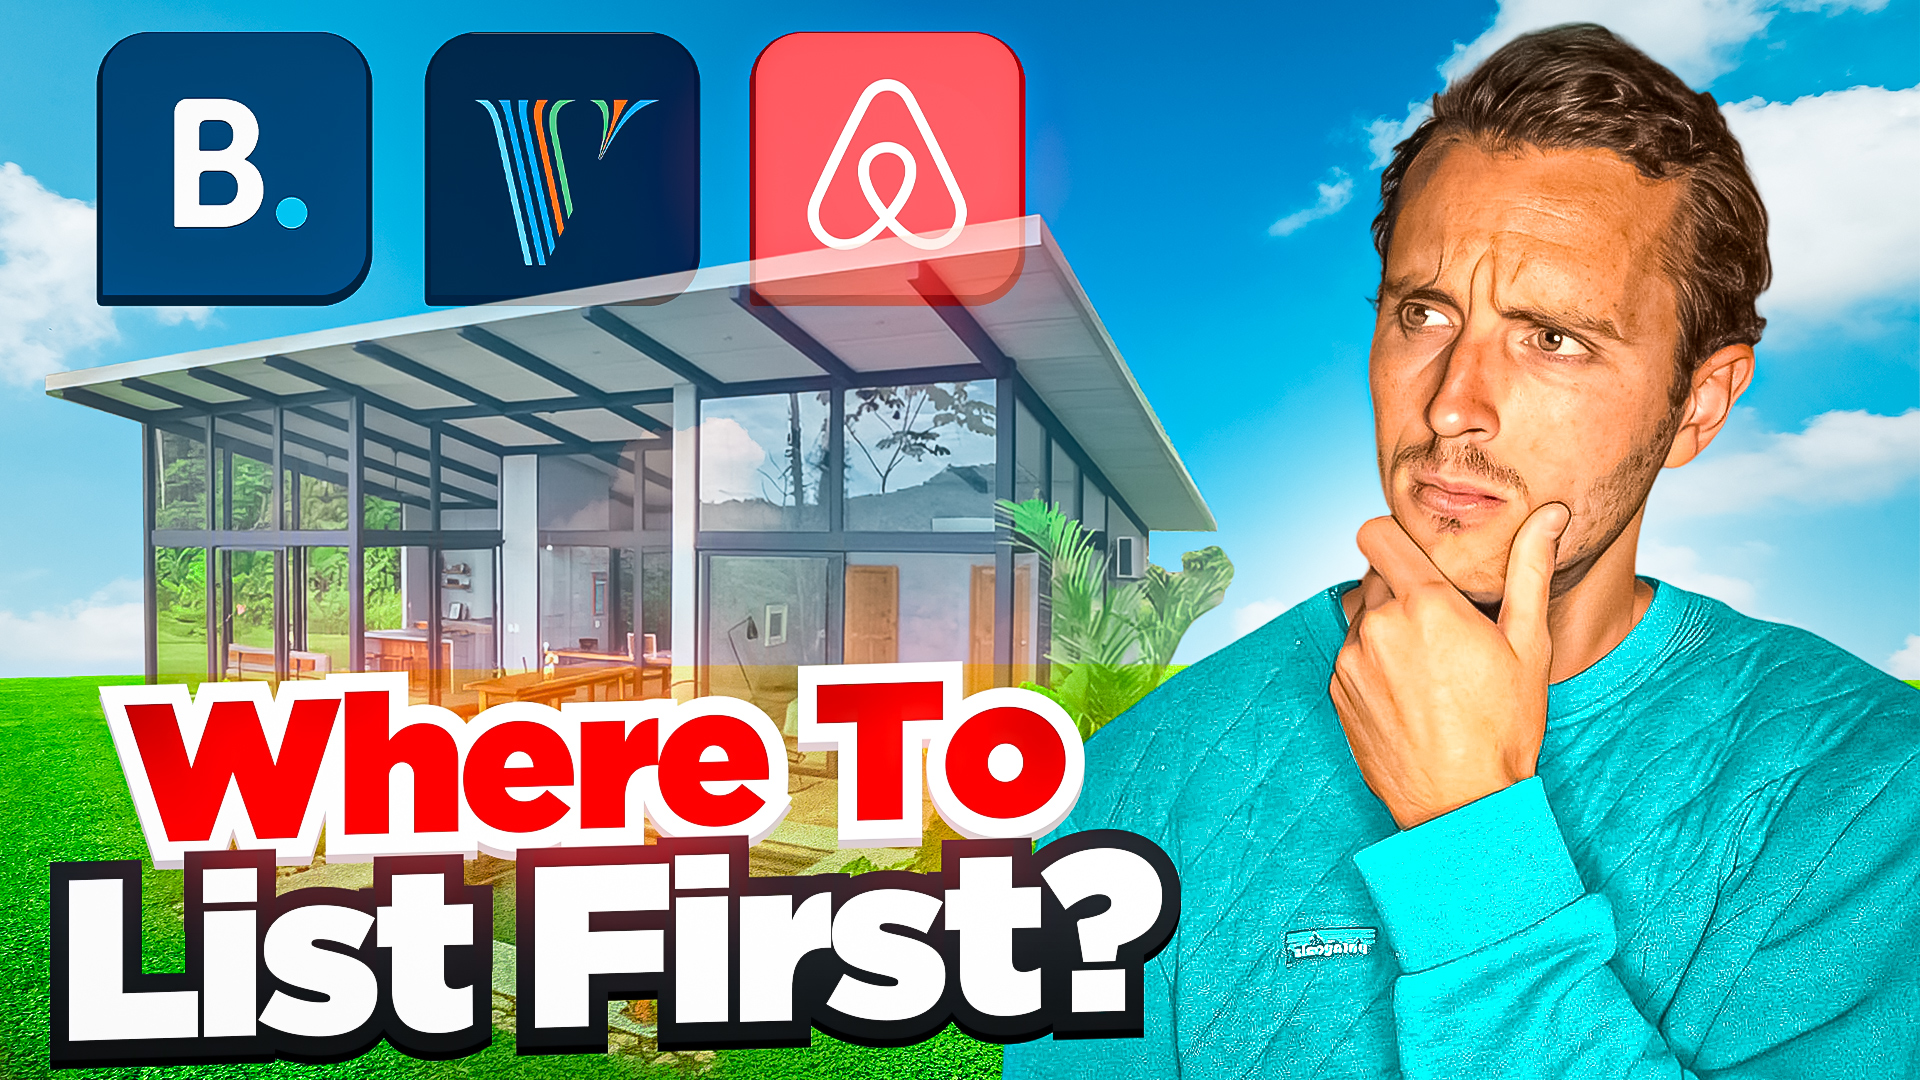 Airbnb, Booking.com, Vrbo, Direct Bookings - The Reality that Many Investors Don't Realize